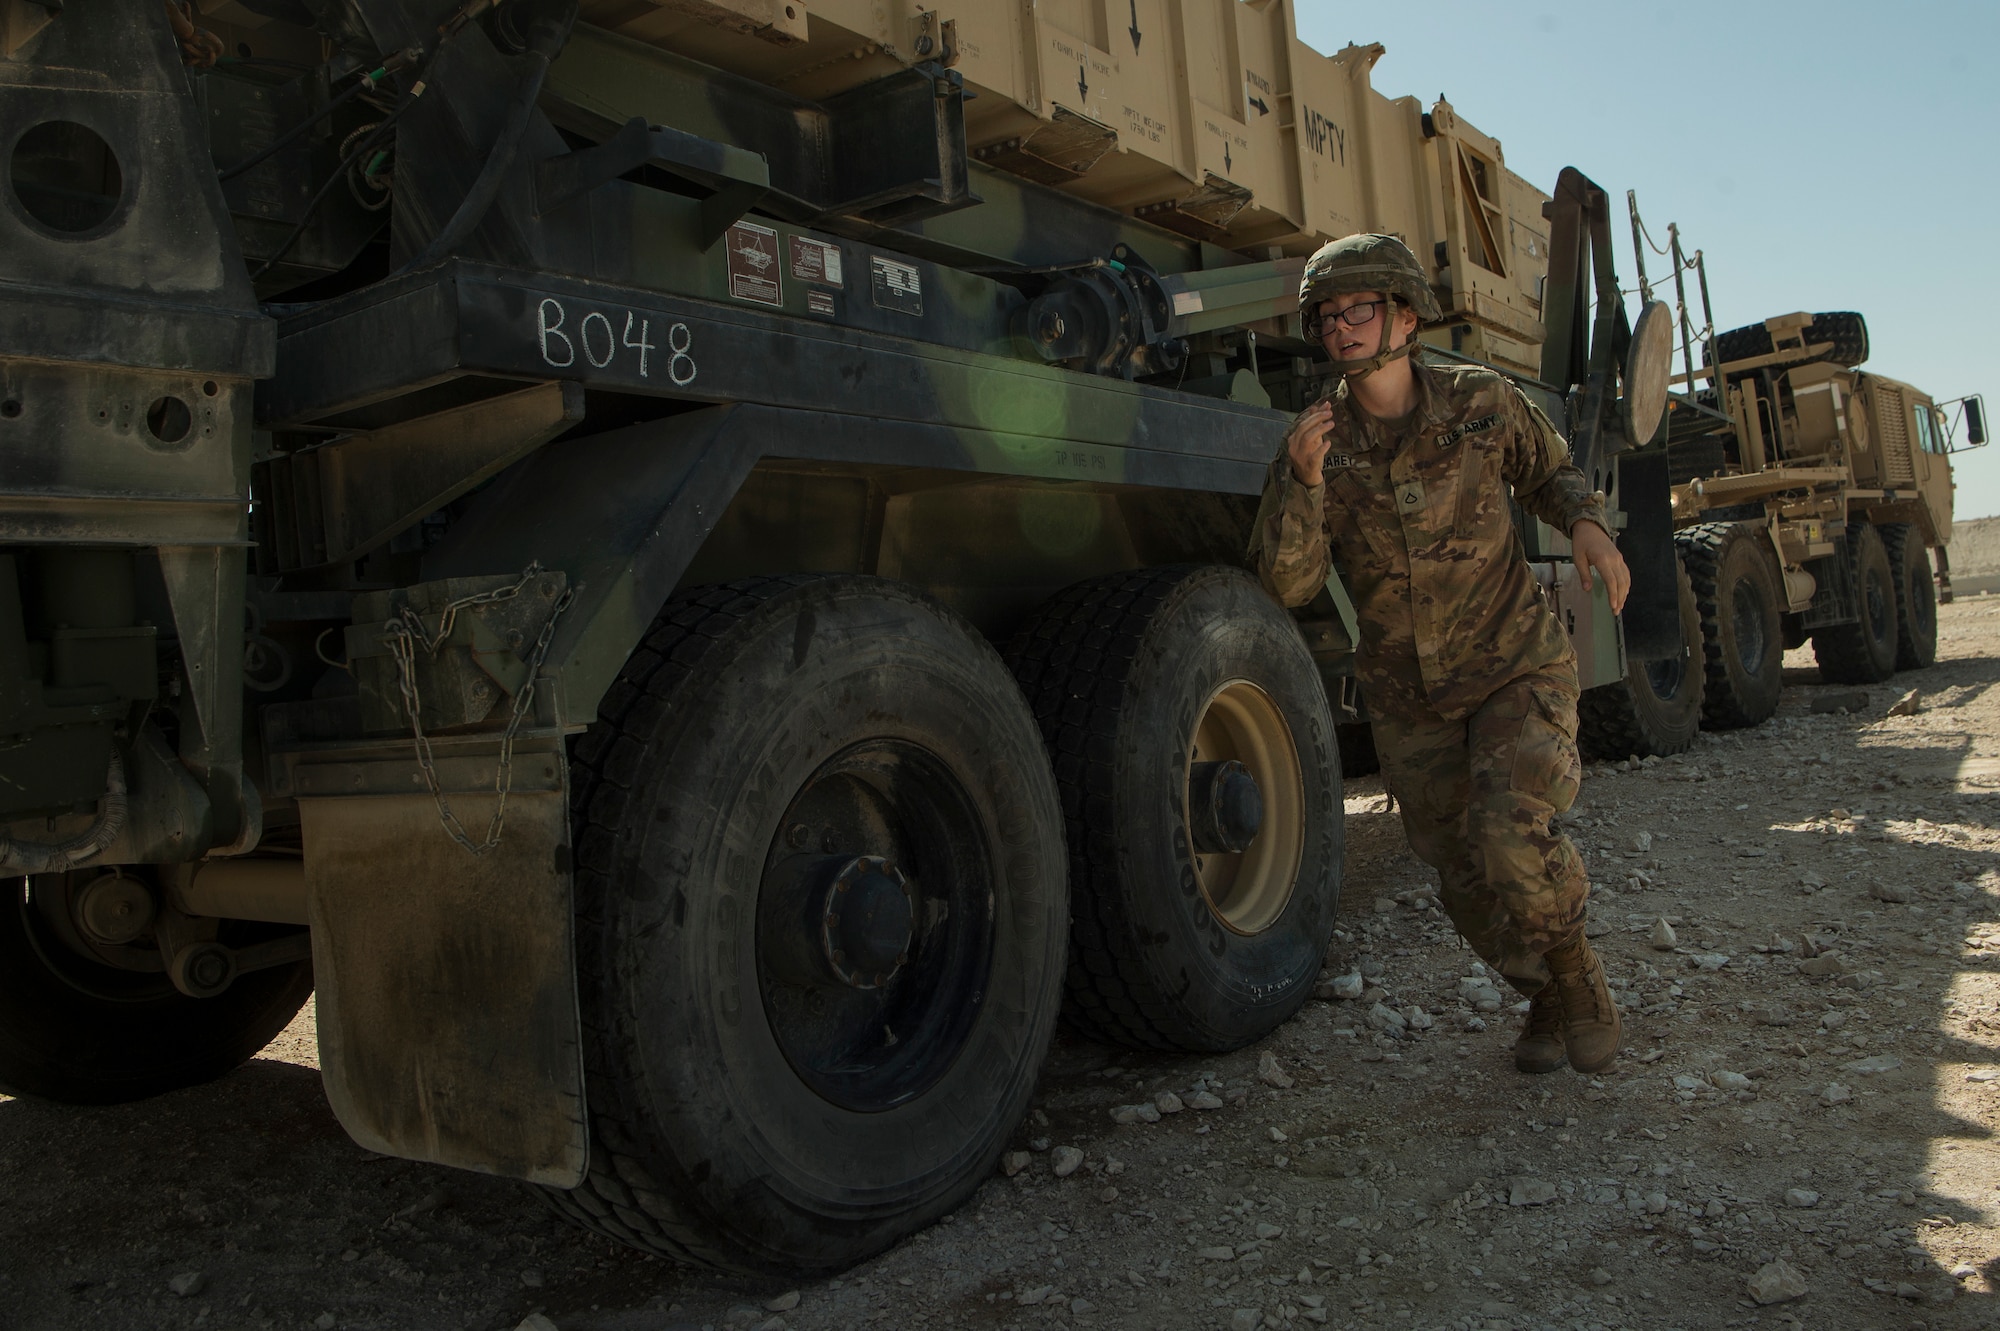 U.S. Army Pfc. Abbigail Carey, Charlie Company, 1st Battalion, 43rd Air Defense Artillery (ADA) Regiment, 11th ADA Brigade patriot missile maintainer and operator, sprints around a training launcher while performing patriot missile readiness drills at Al Udeid Air Base, Qatar, April 16, 2019. Soldiers of the 1-43rd ADA Battalion provide the installation with an air defense capability, protecting personnel, assets and operations here from potential air threats. (U.S. Air Force photo by Tech. Sgt. Christopher Hubenthal)